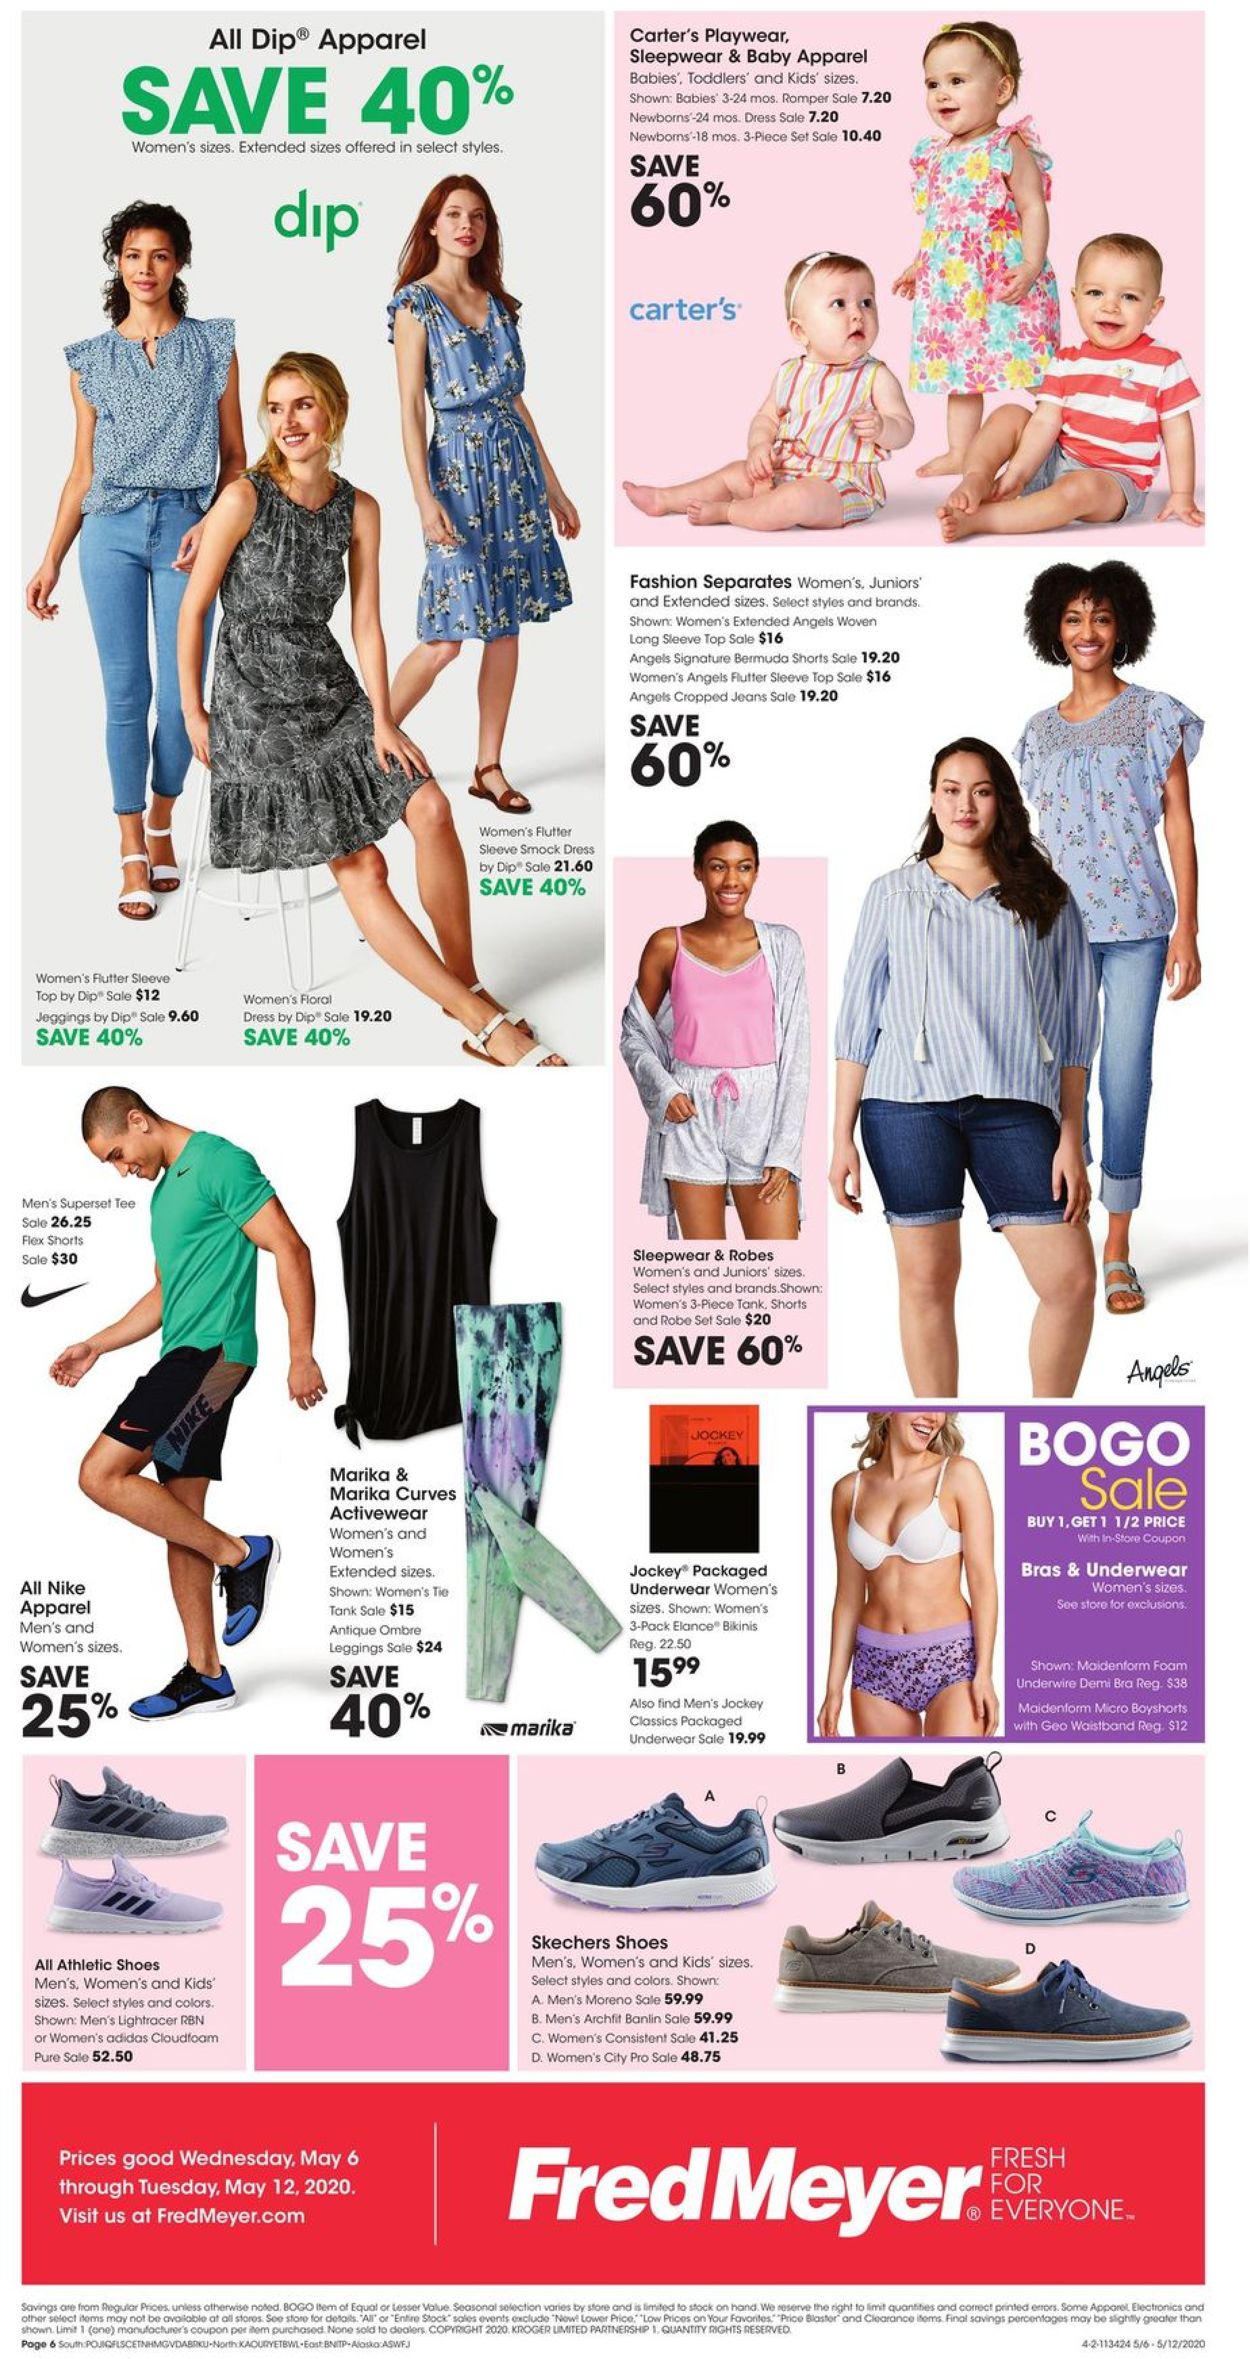 Fred Meyer Current weekly ad 05/06 - 05/12/2020 [6] - frequent-ads.com